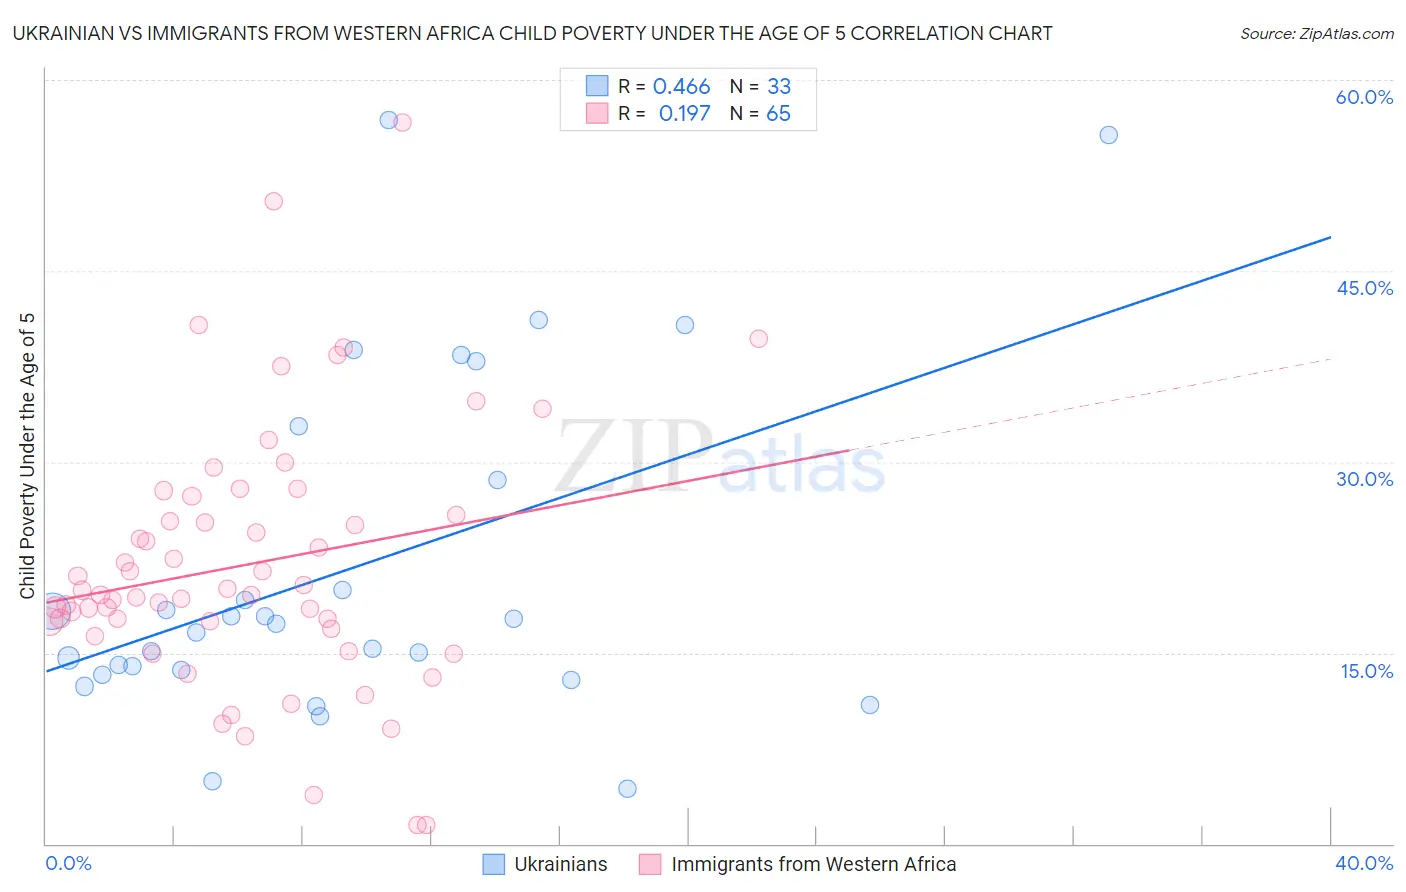 Ukrainian vs Immigrants from Western Africa Child Poverty Under the Age of 5